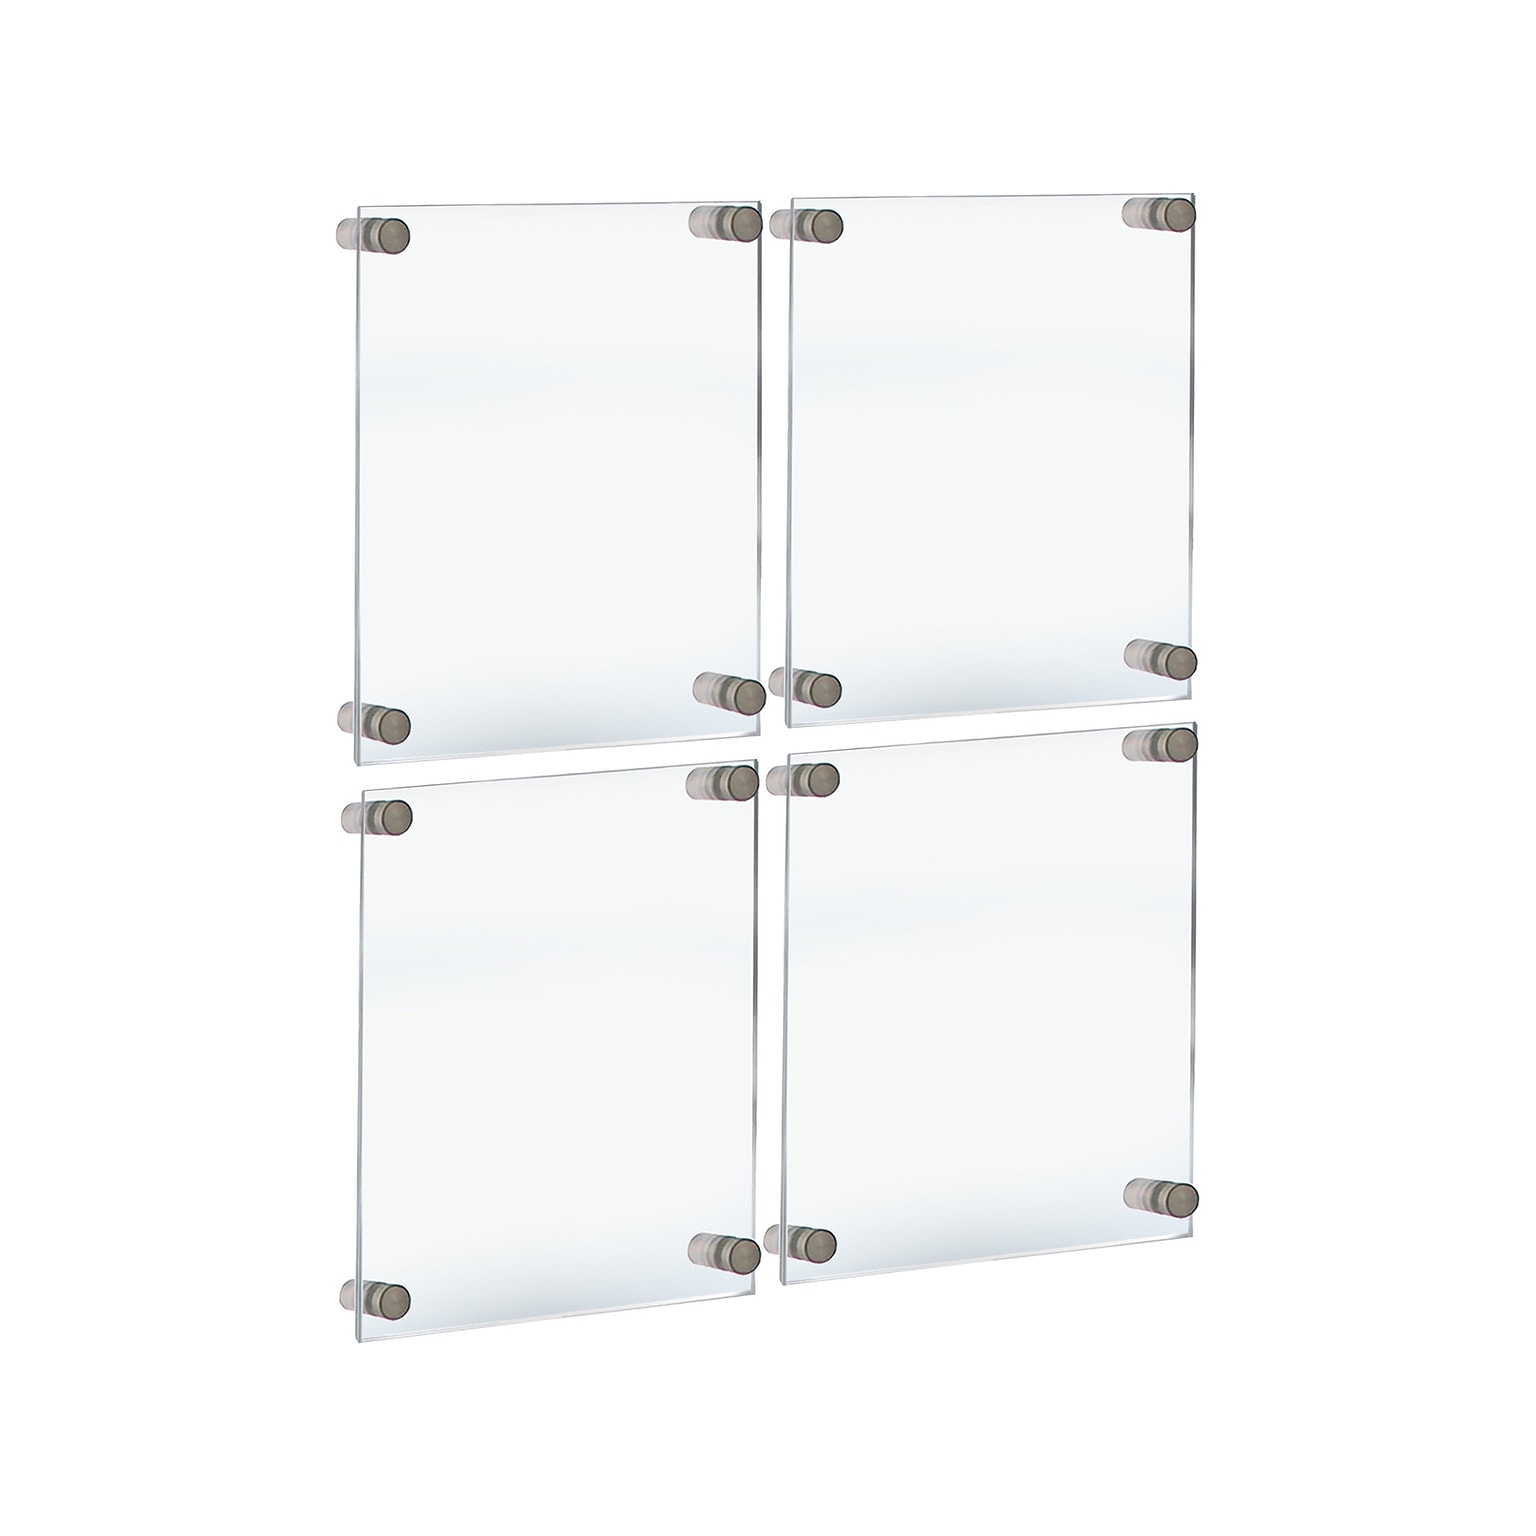 Azar Floating Frame with Standoff Caps, 11 x 17, Clear/Silver Acrylic, 4/Pack (105508-SLV-4PK)